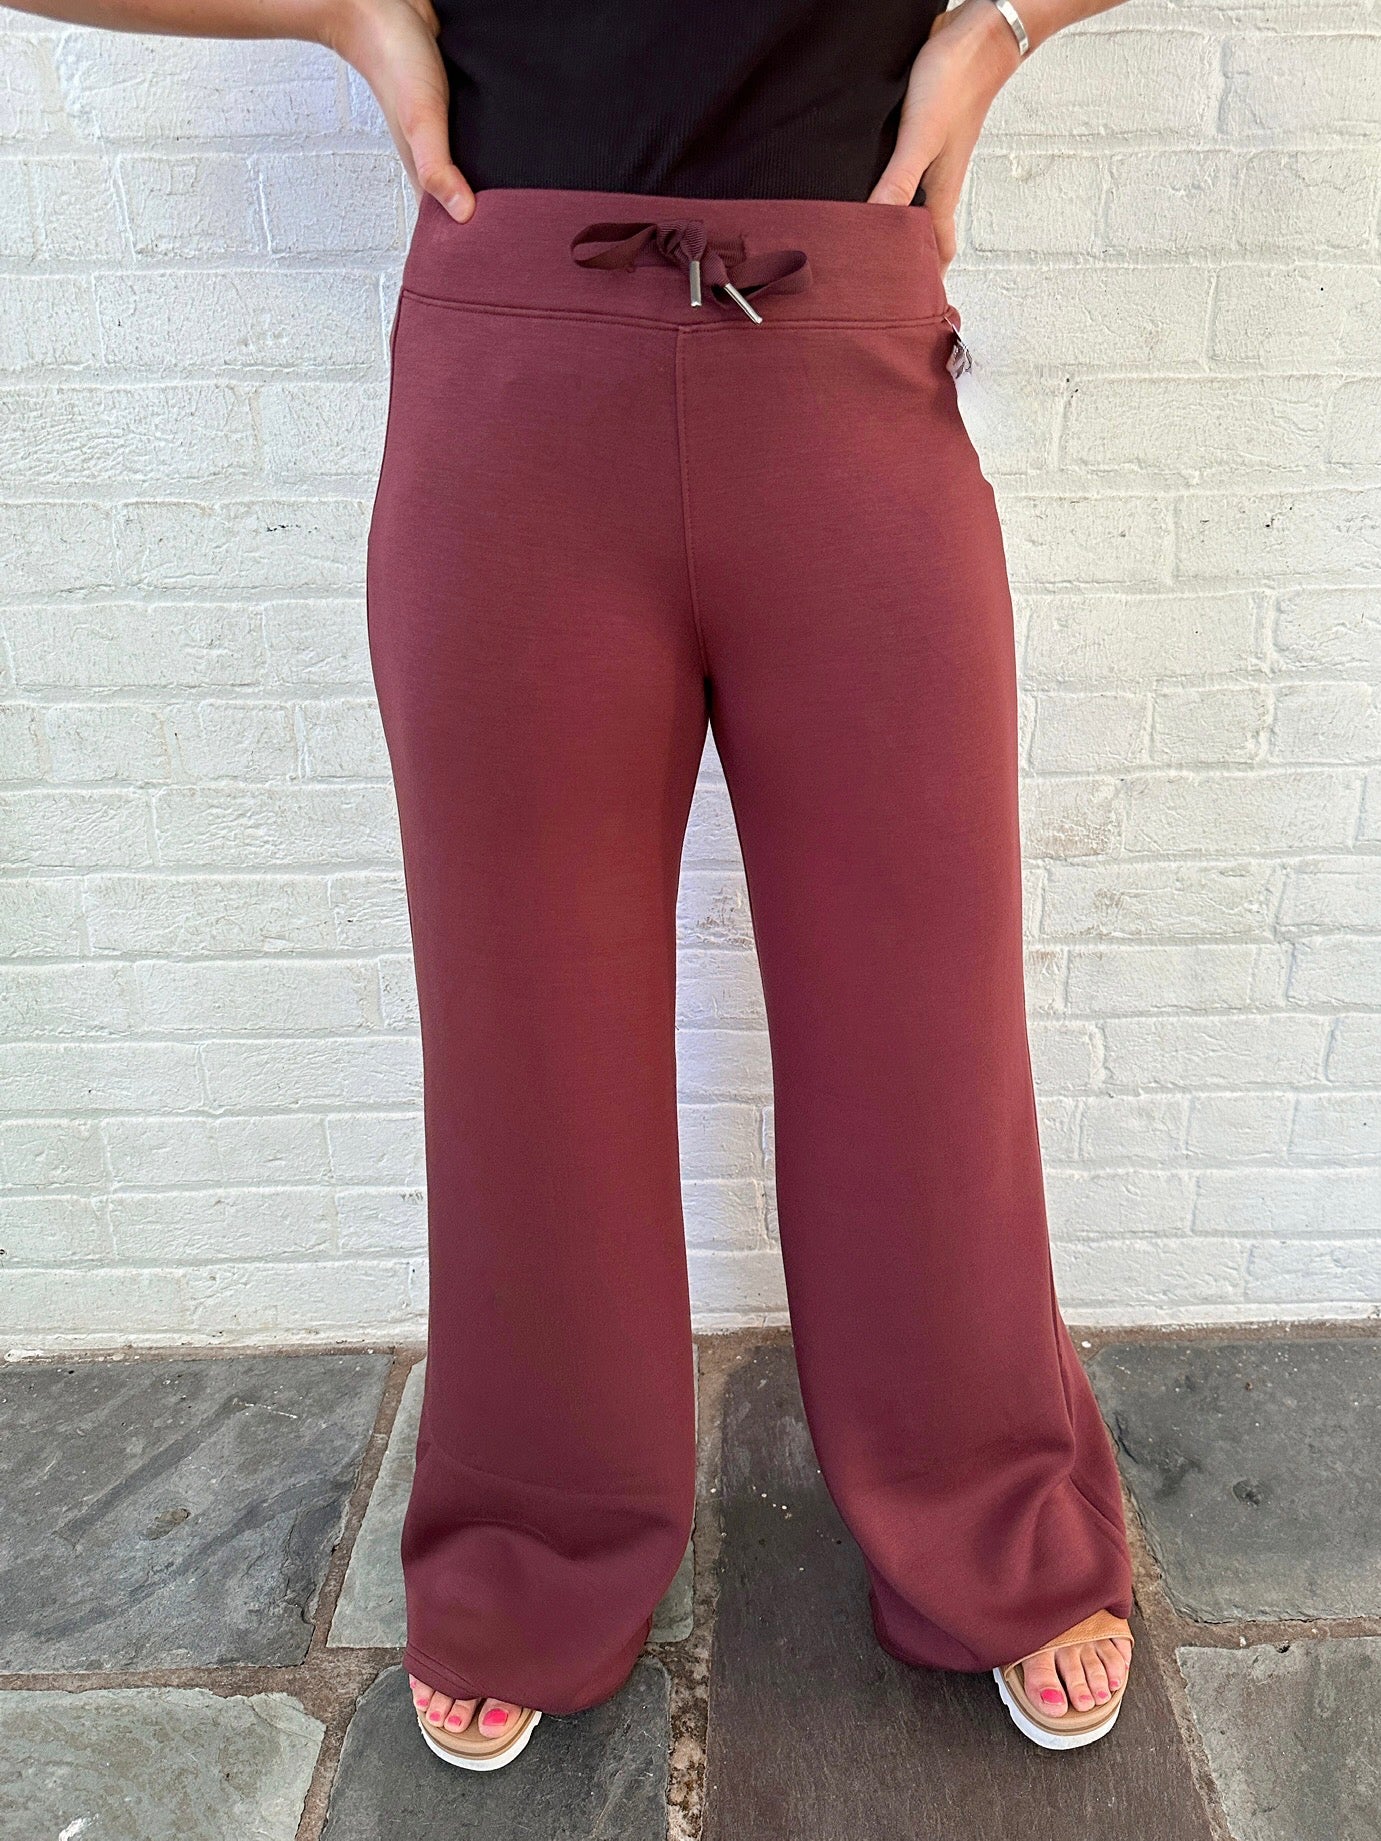 Assets By Spanx, Pants & Jumpsuits, Spanx Assets By Spanx Burgundy  Colored Leggings Size Large Shimmery